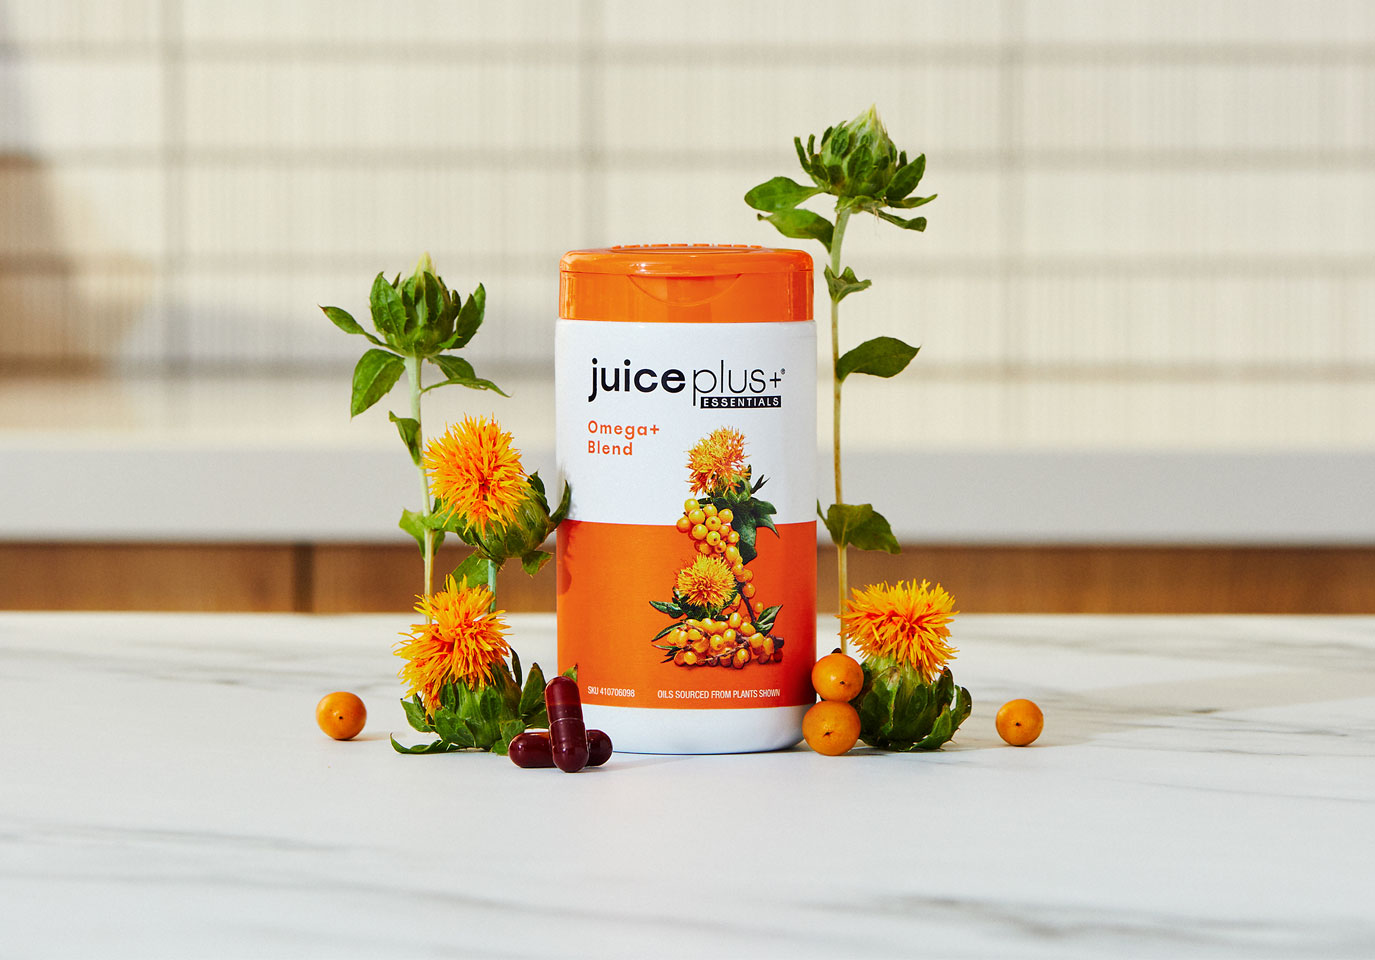 Discover The Benefits Of Algae With Juice Plus+ Plant-based Omega+ Blend